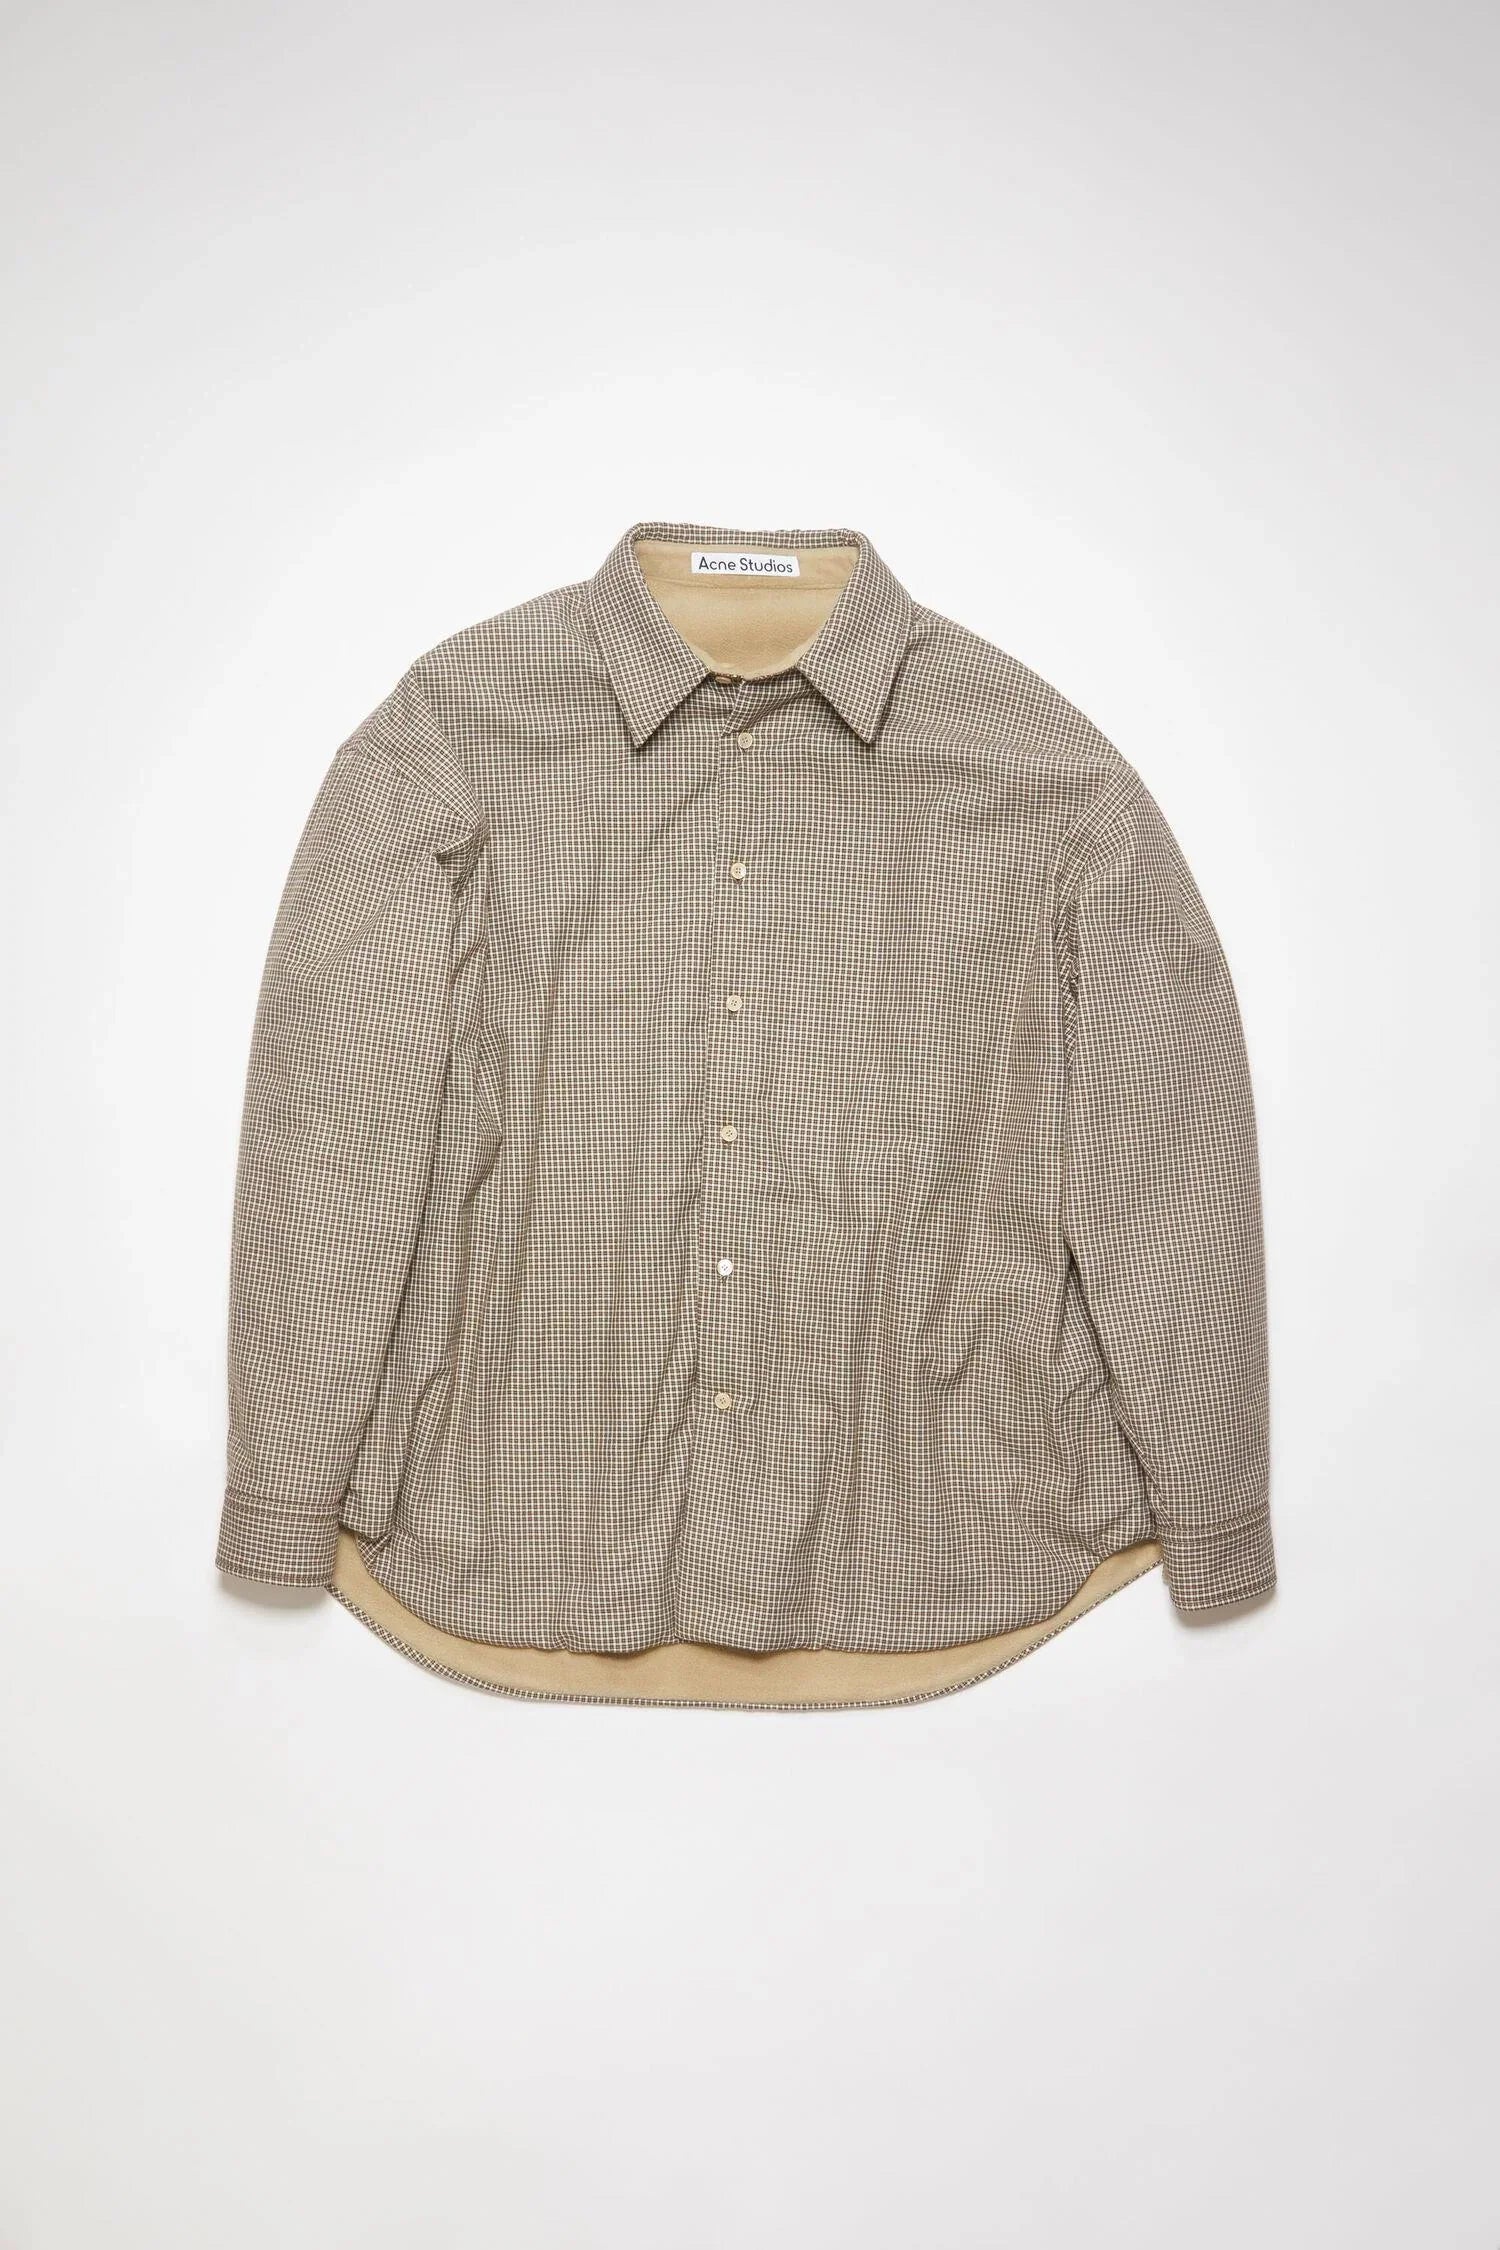 ACNE STUDIOS - BROWN AND GREEN REVERSIBLE JACKET - LE LABO STORE